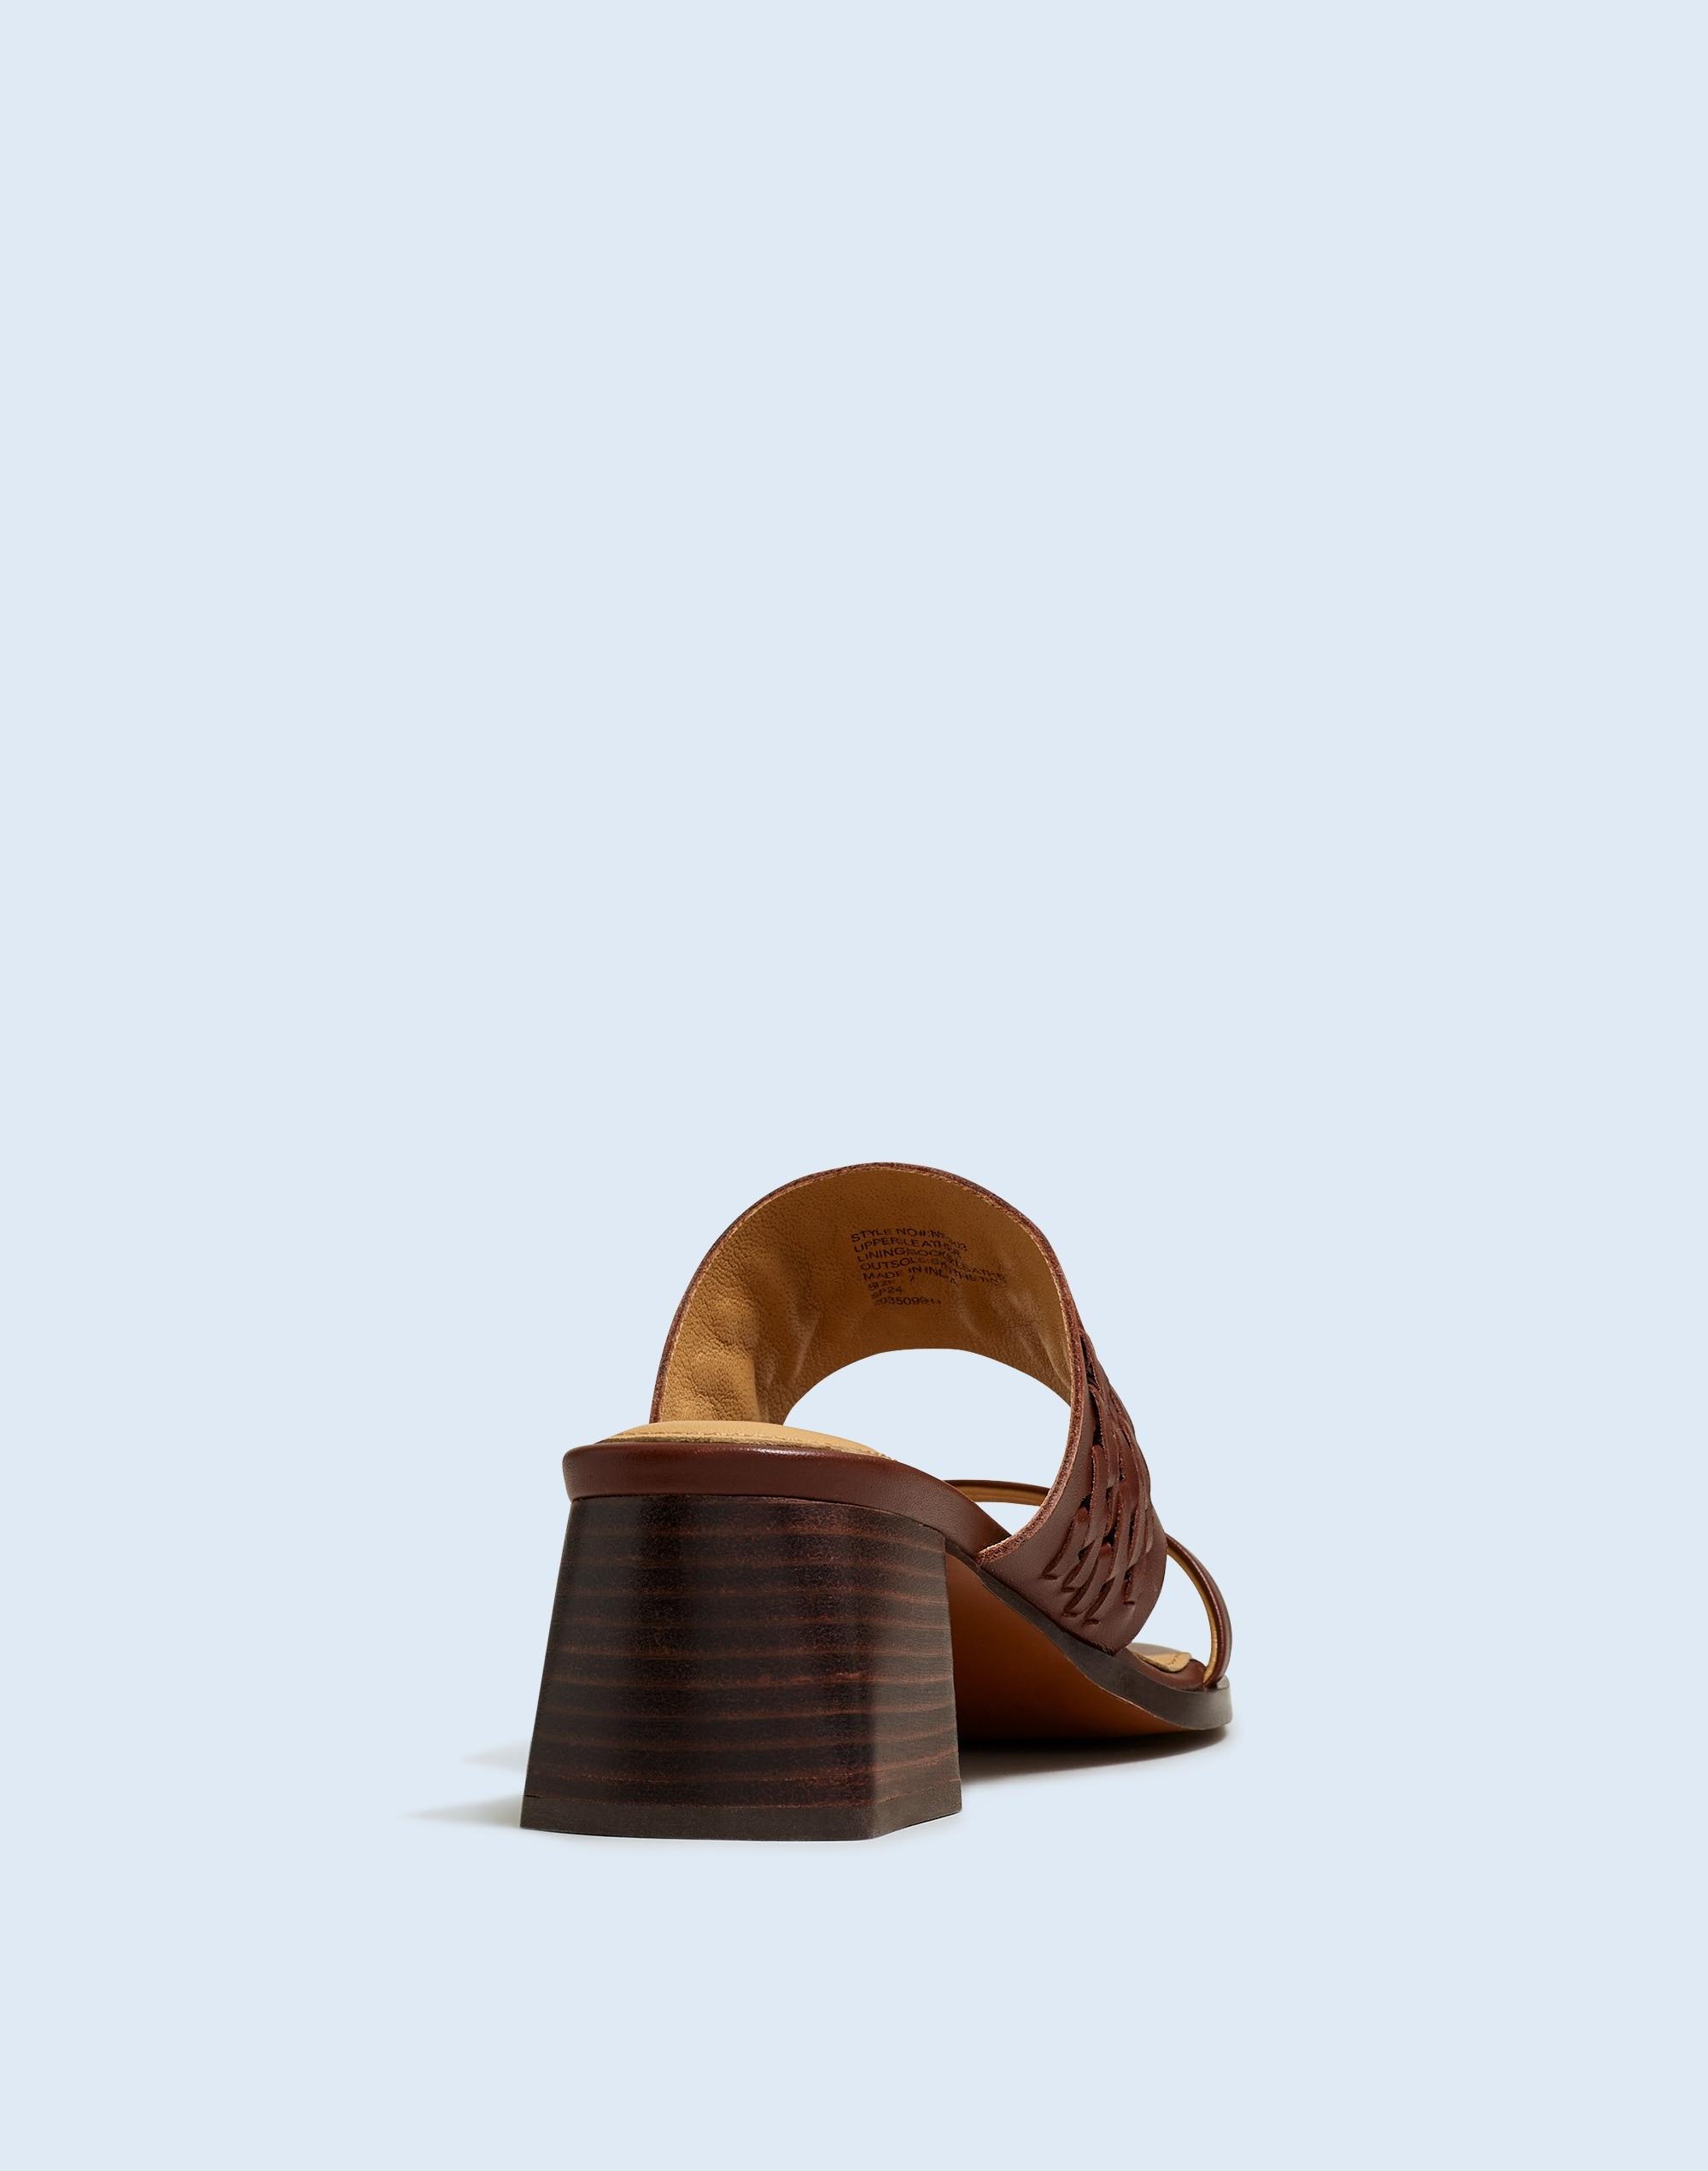 The Kaitlin Sandal in Woven Leather Product Image